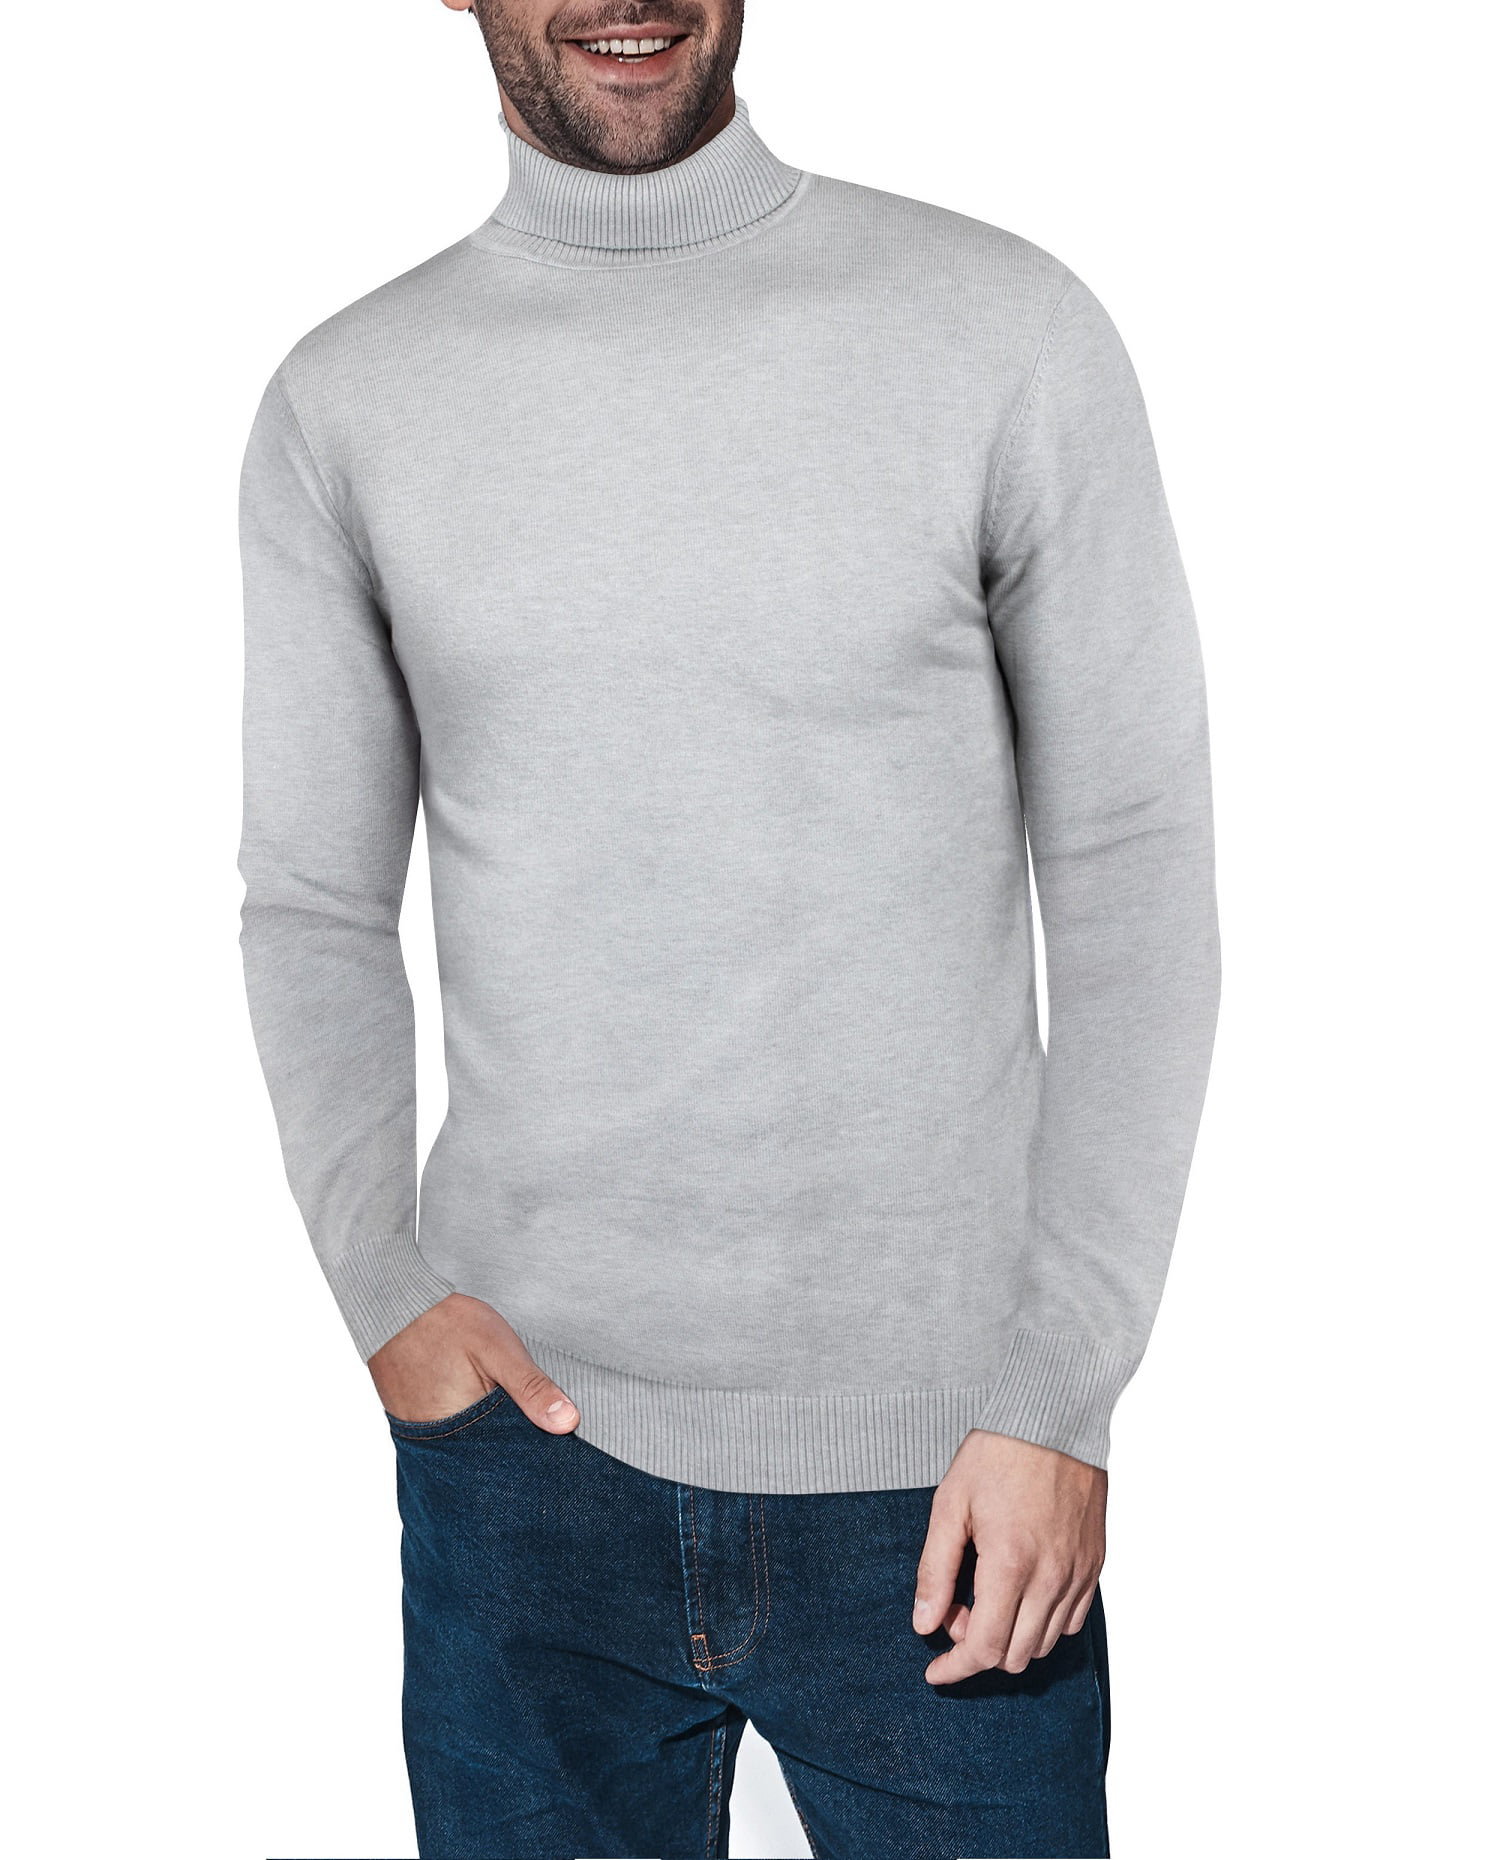 Slim Fit Pullover with Roll Collar X RAY Turtleneck & Mock Neck Sweater for Men Regular and Big & Tall Sizes